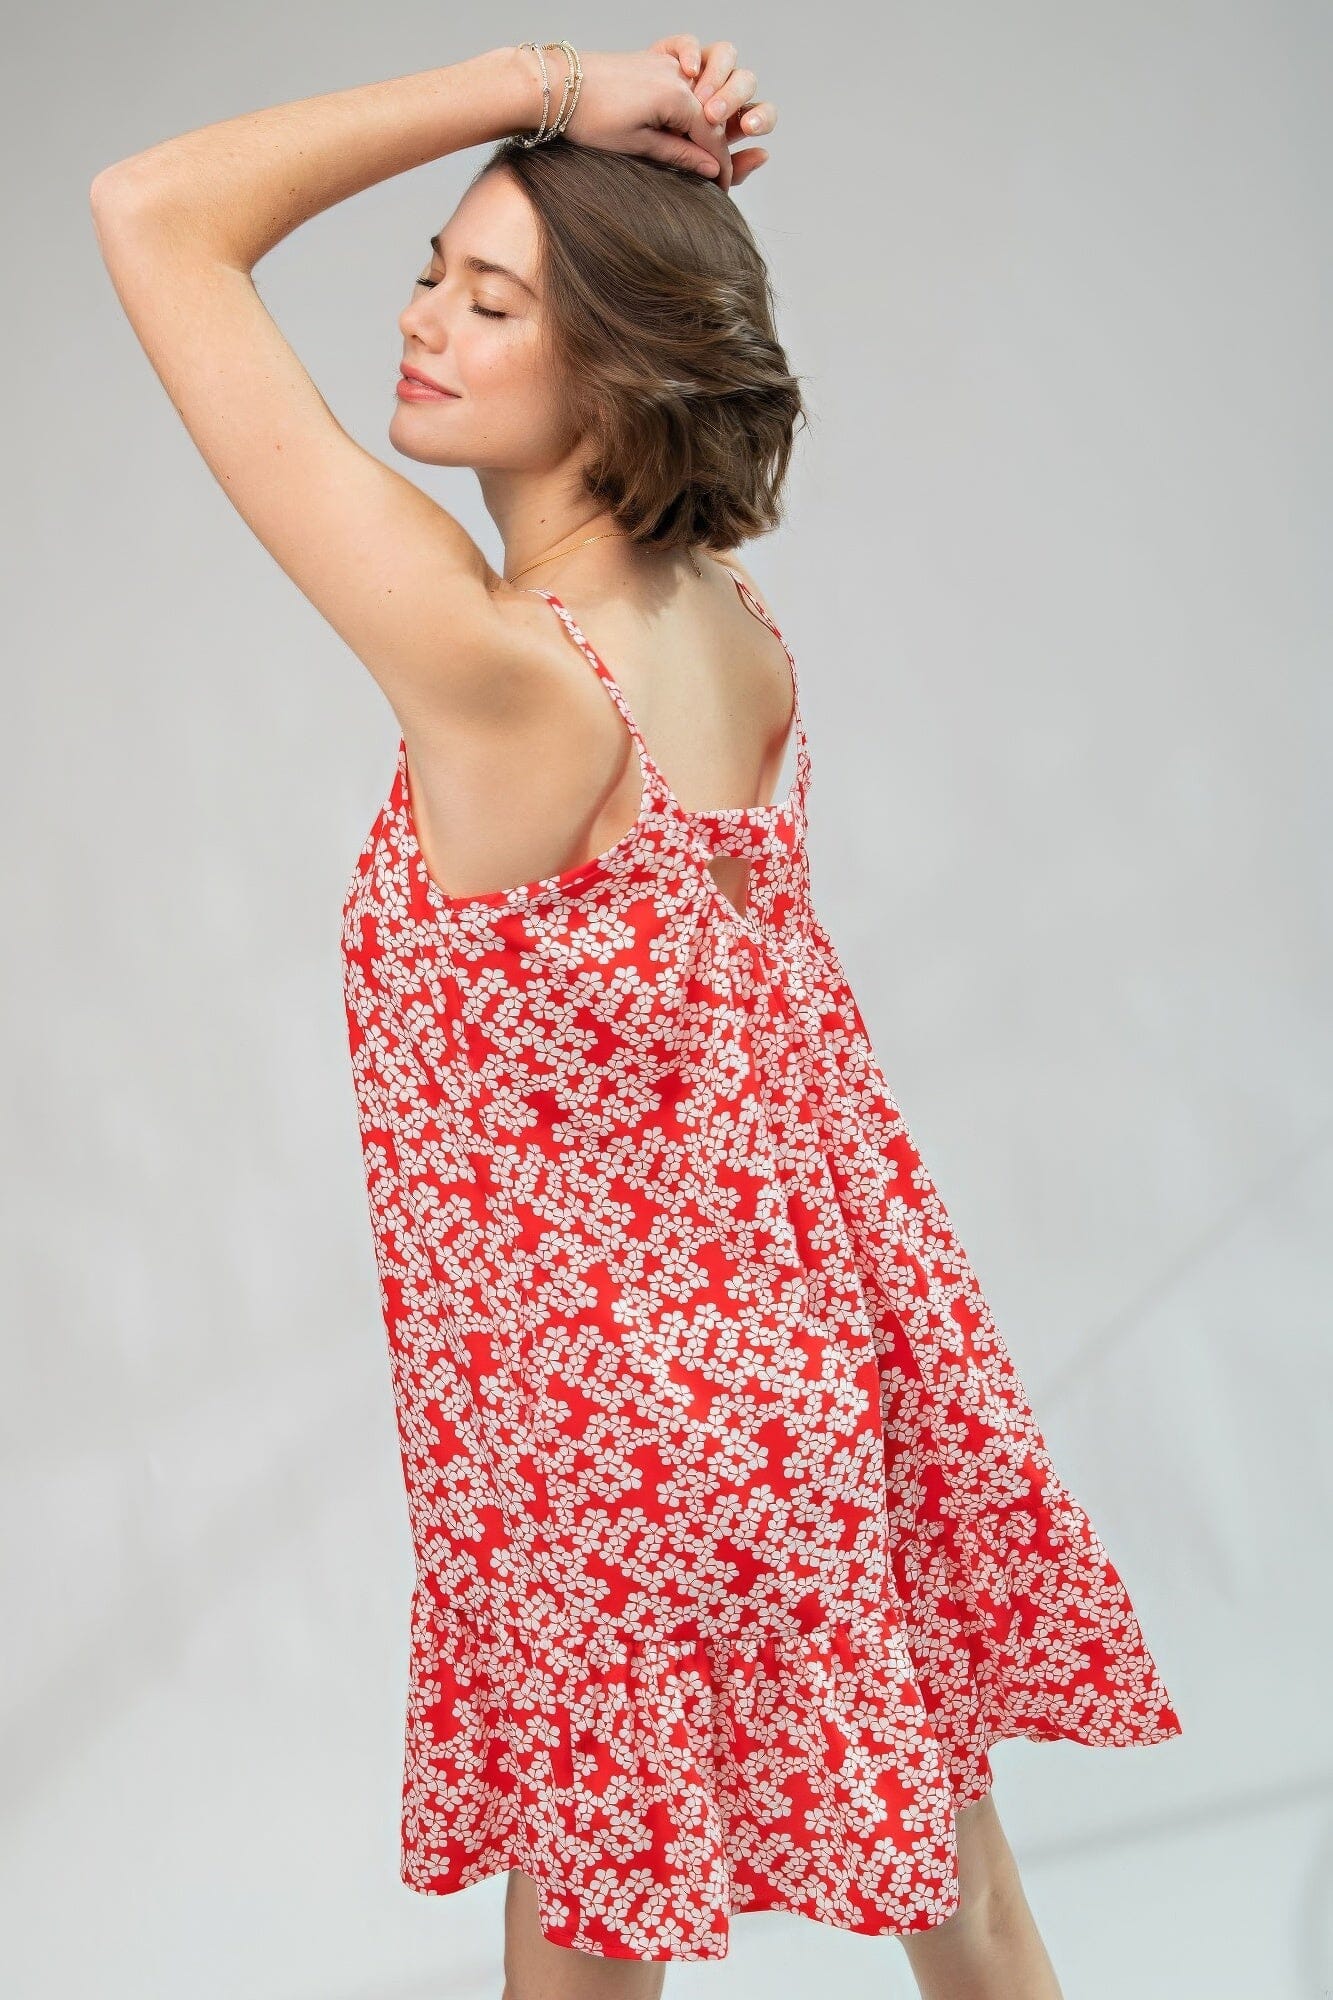 Red Floral Wool Peach Scoop Neck Ruffle Bottom Spaghetti Straps Cami Dress Dresses jehouze 